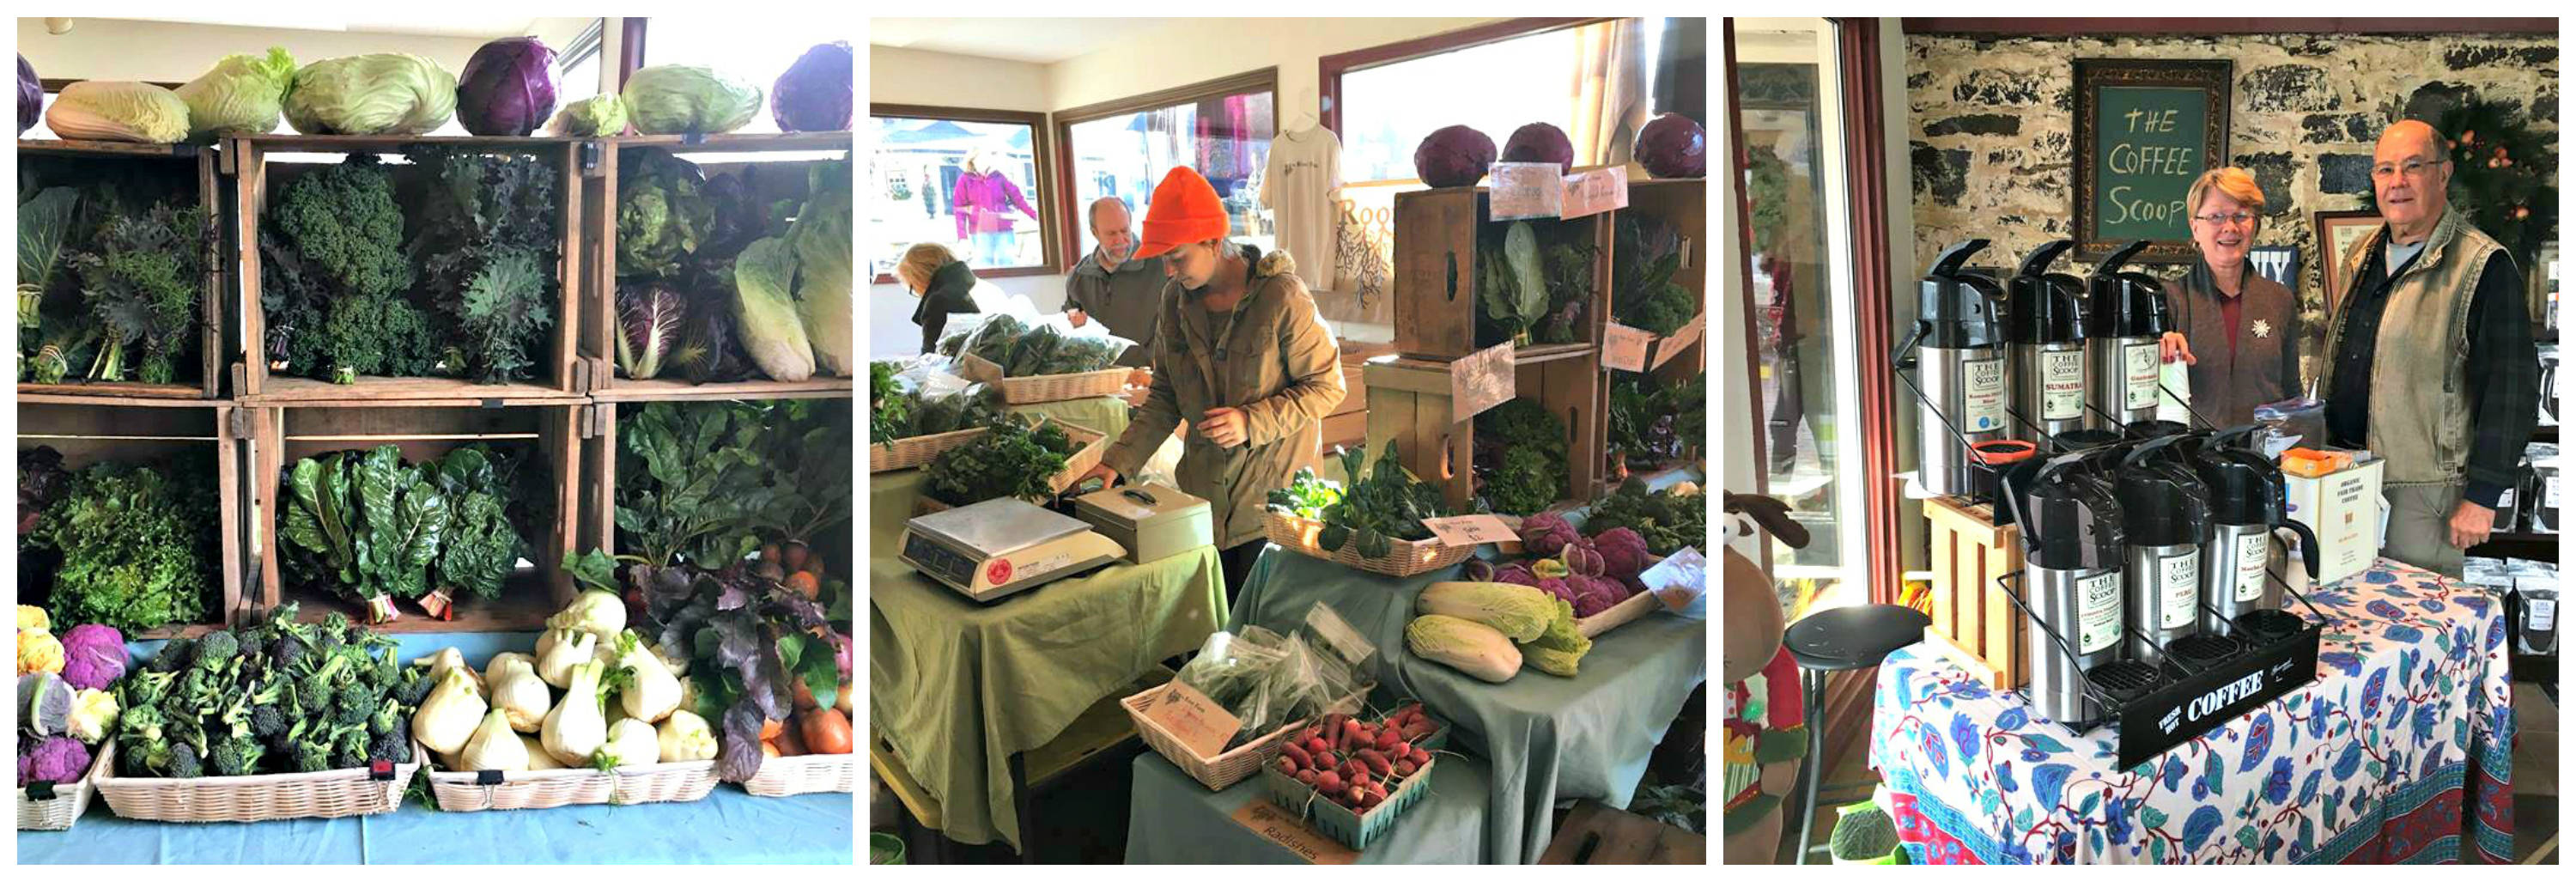 Photo Credit: Wrightstown Farmers Market